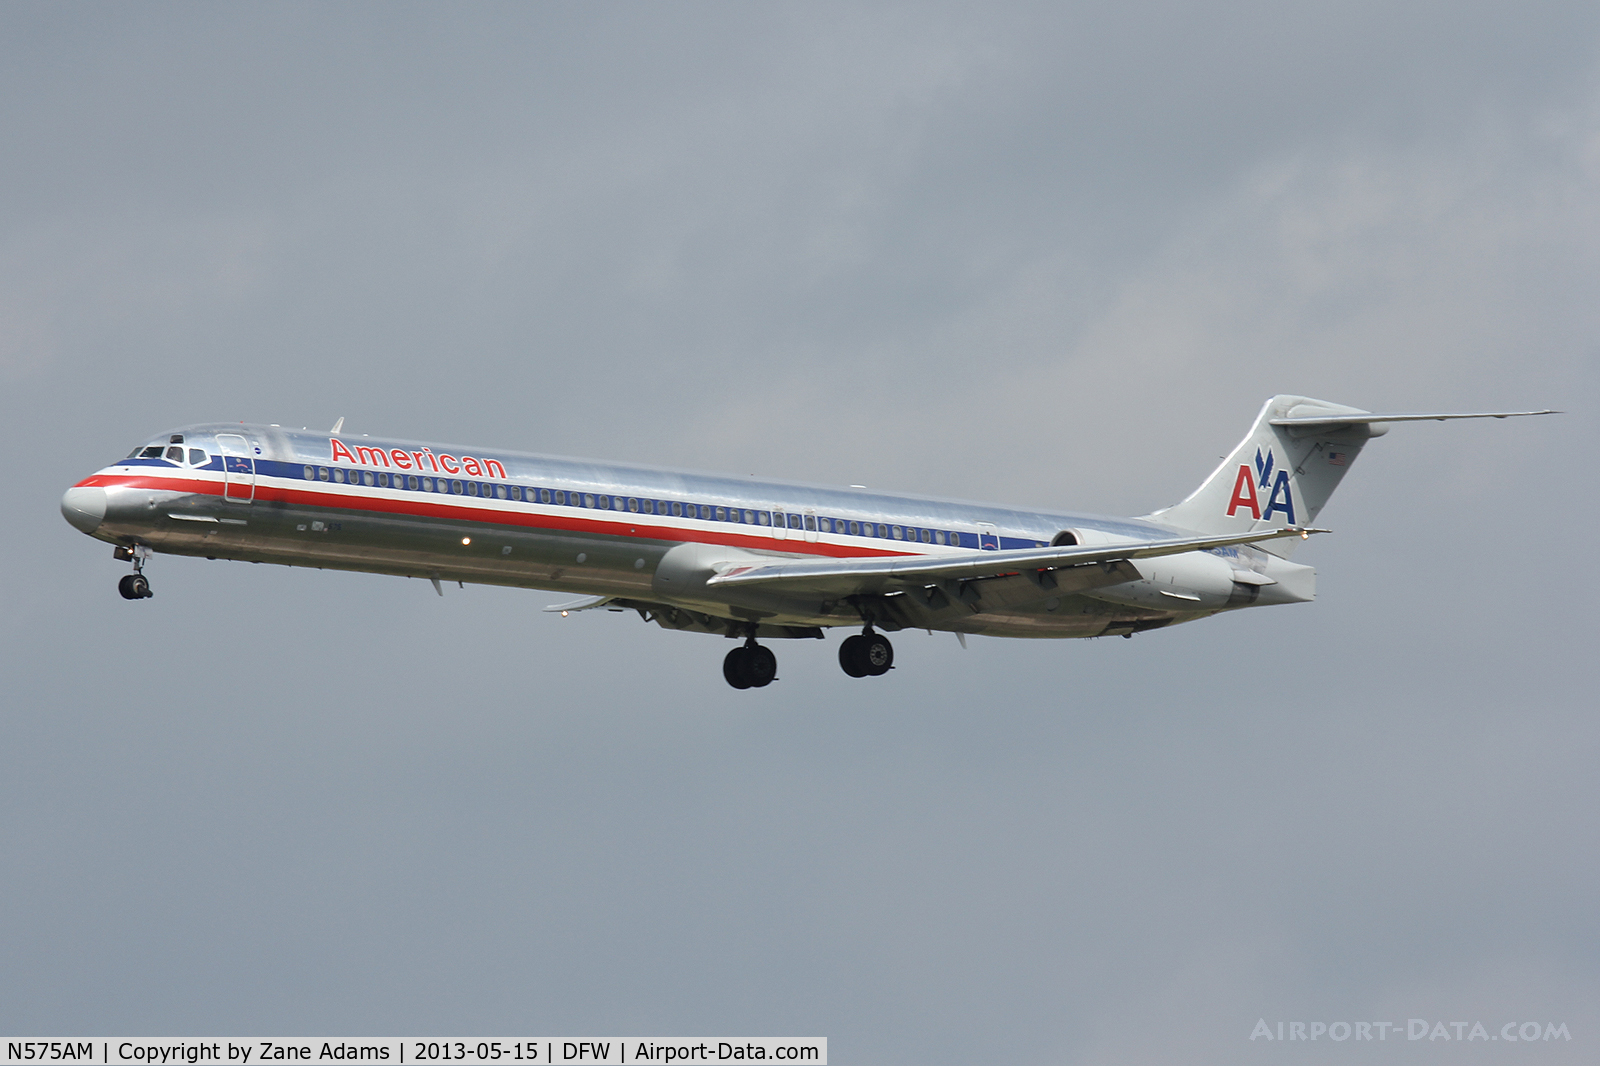 N575AM, 1991 McDonnell Douglas MD-82 (DC-9-82) C/N 53152, American Airlines at DFW Airport